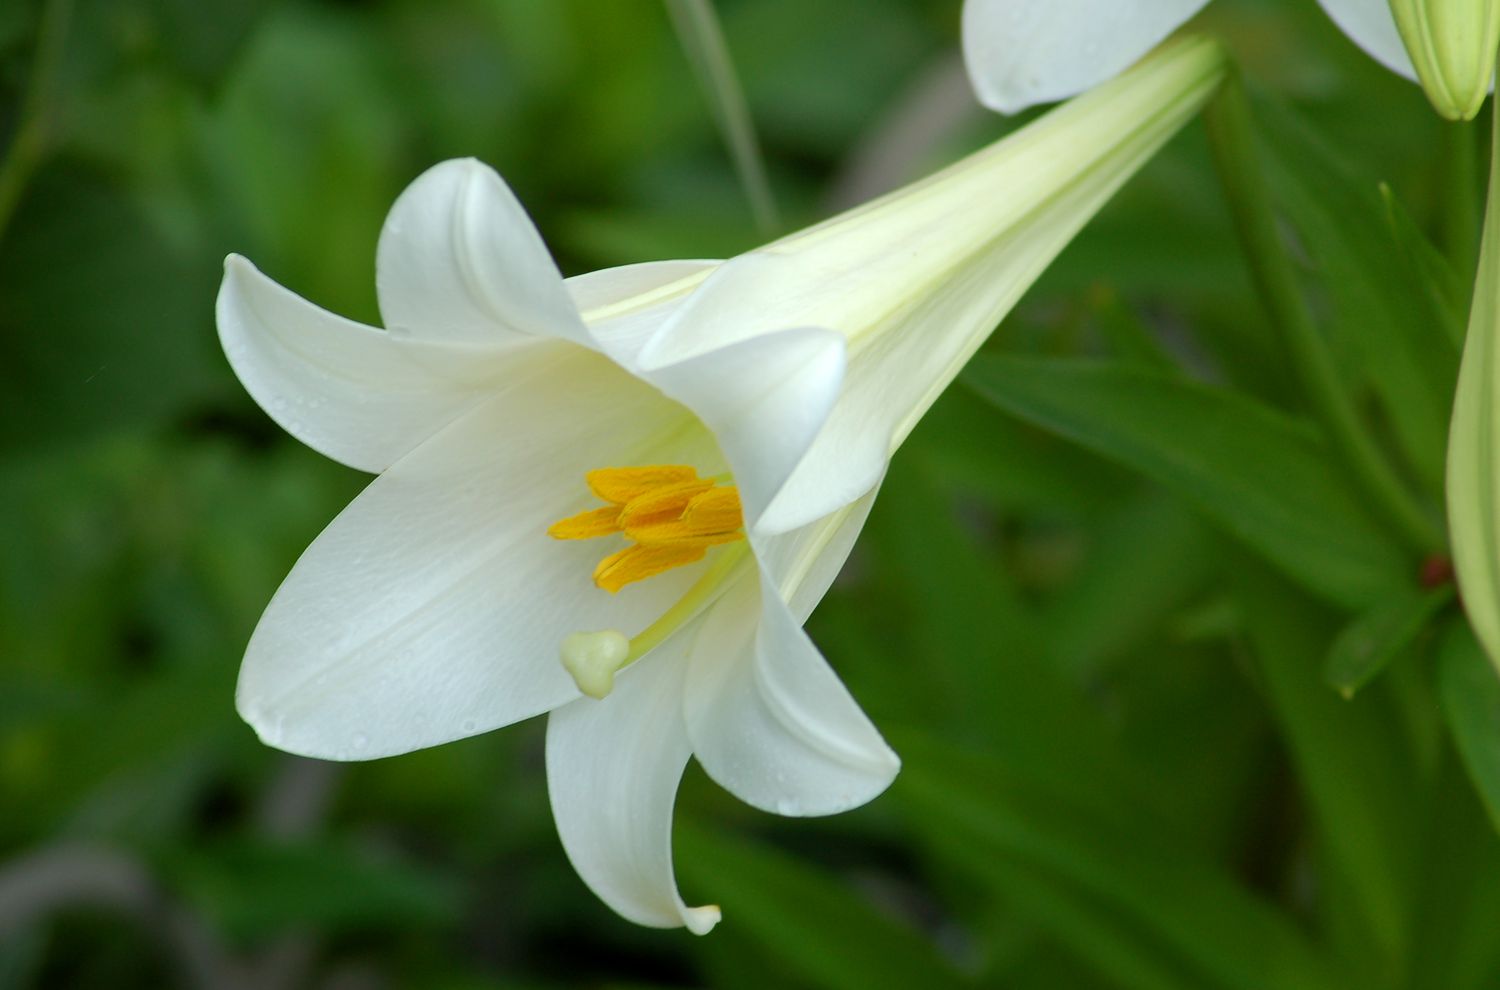 Easter lily flower